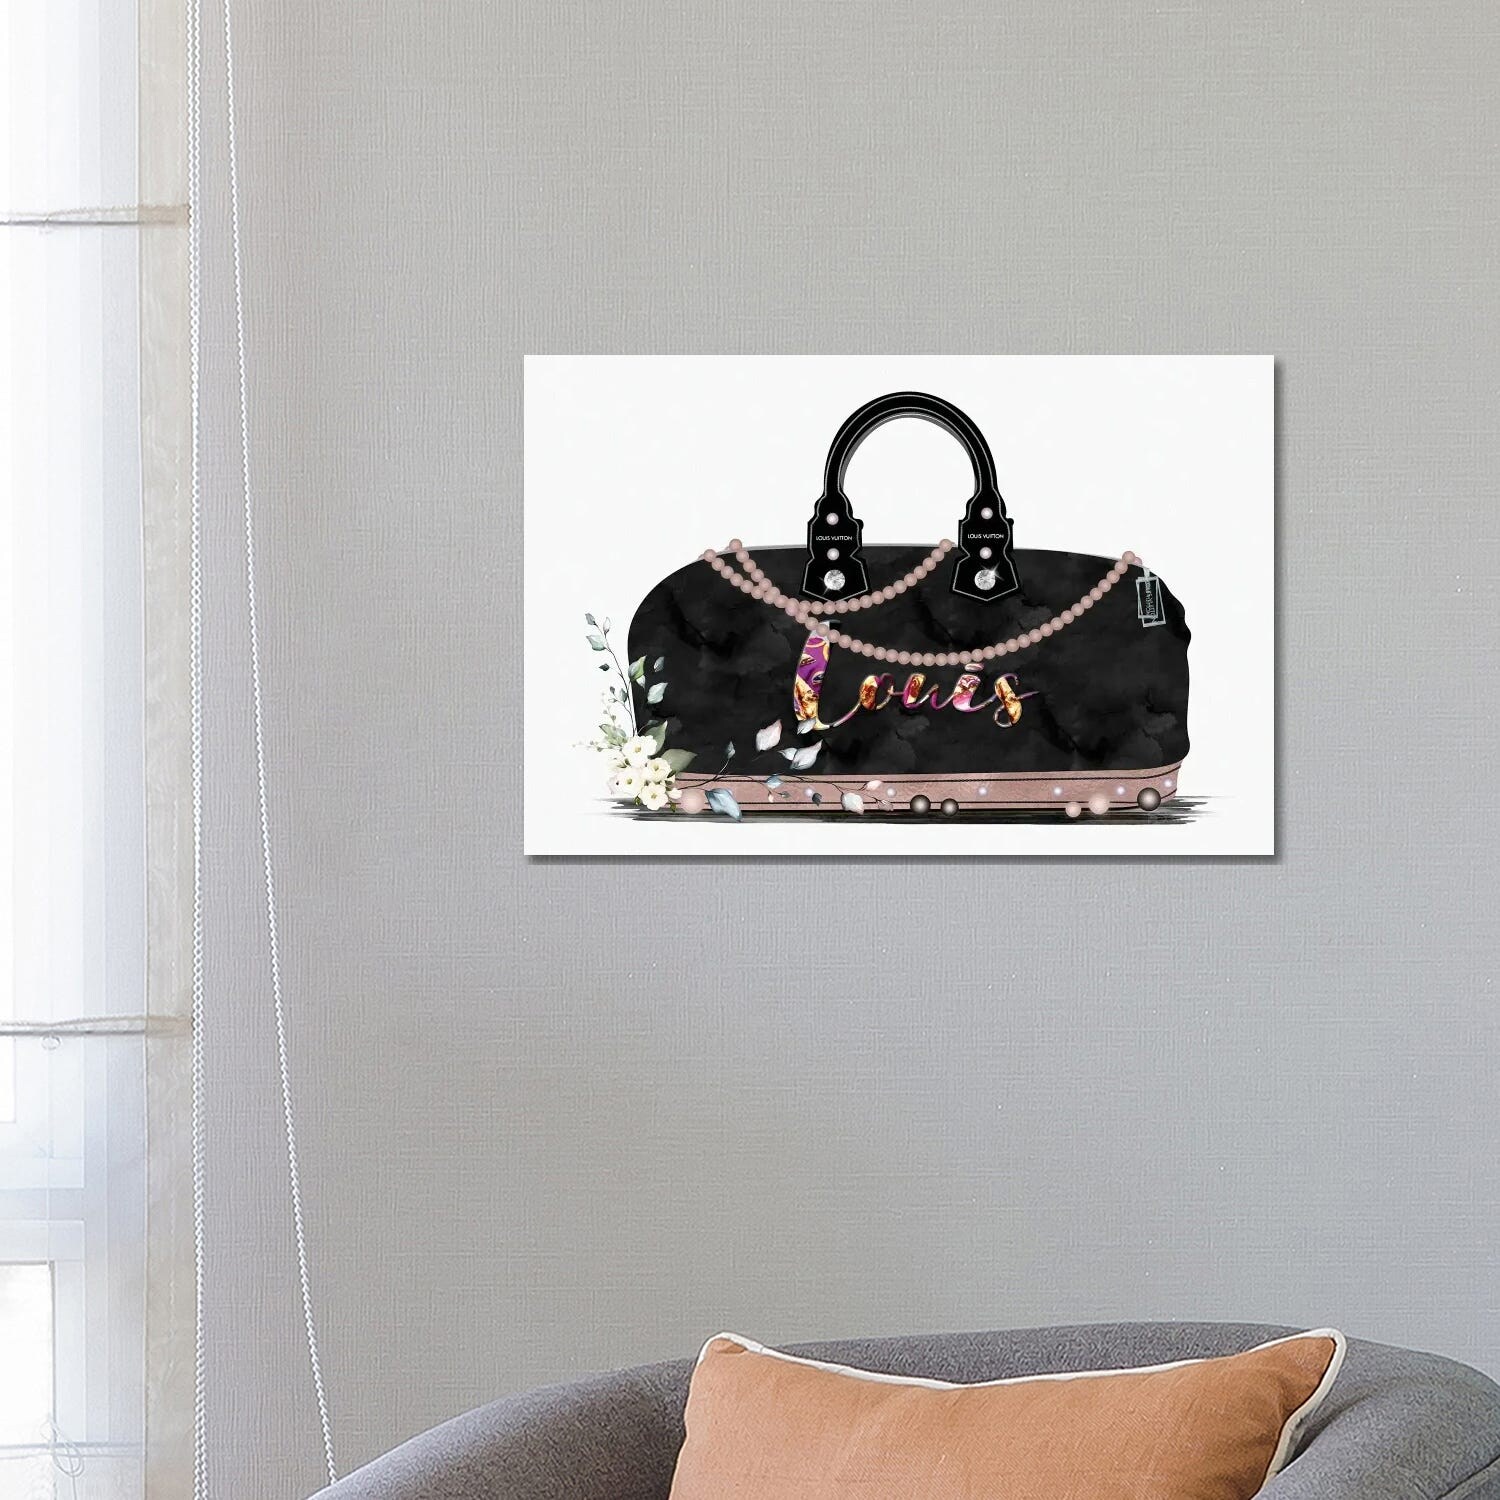 iCanvas Black And Tan Fashion Duffle Bag With Florals & Pearls